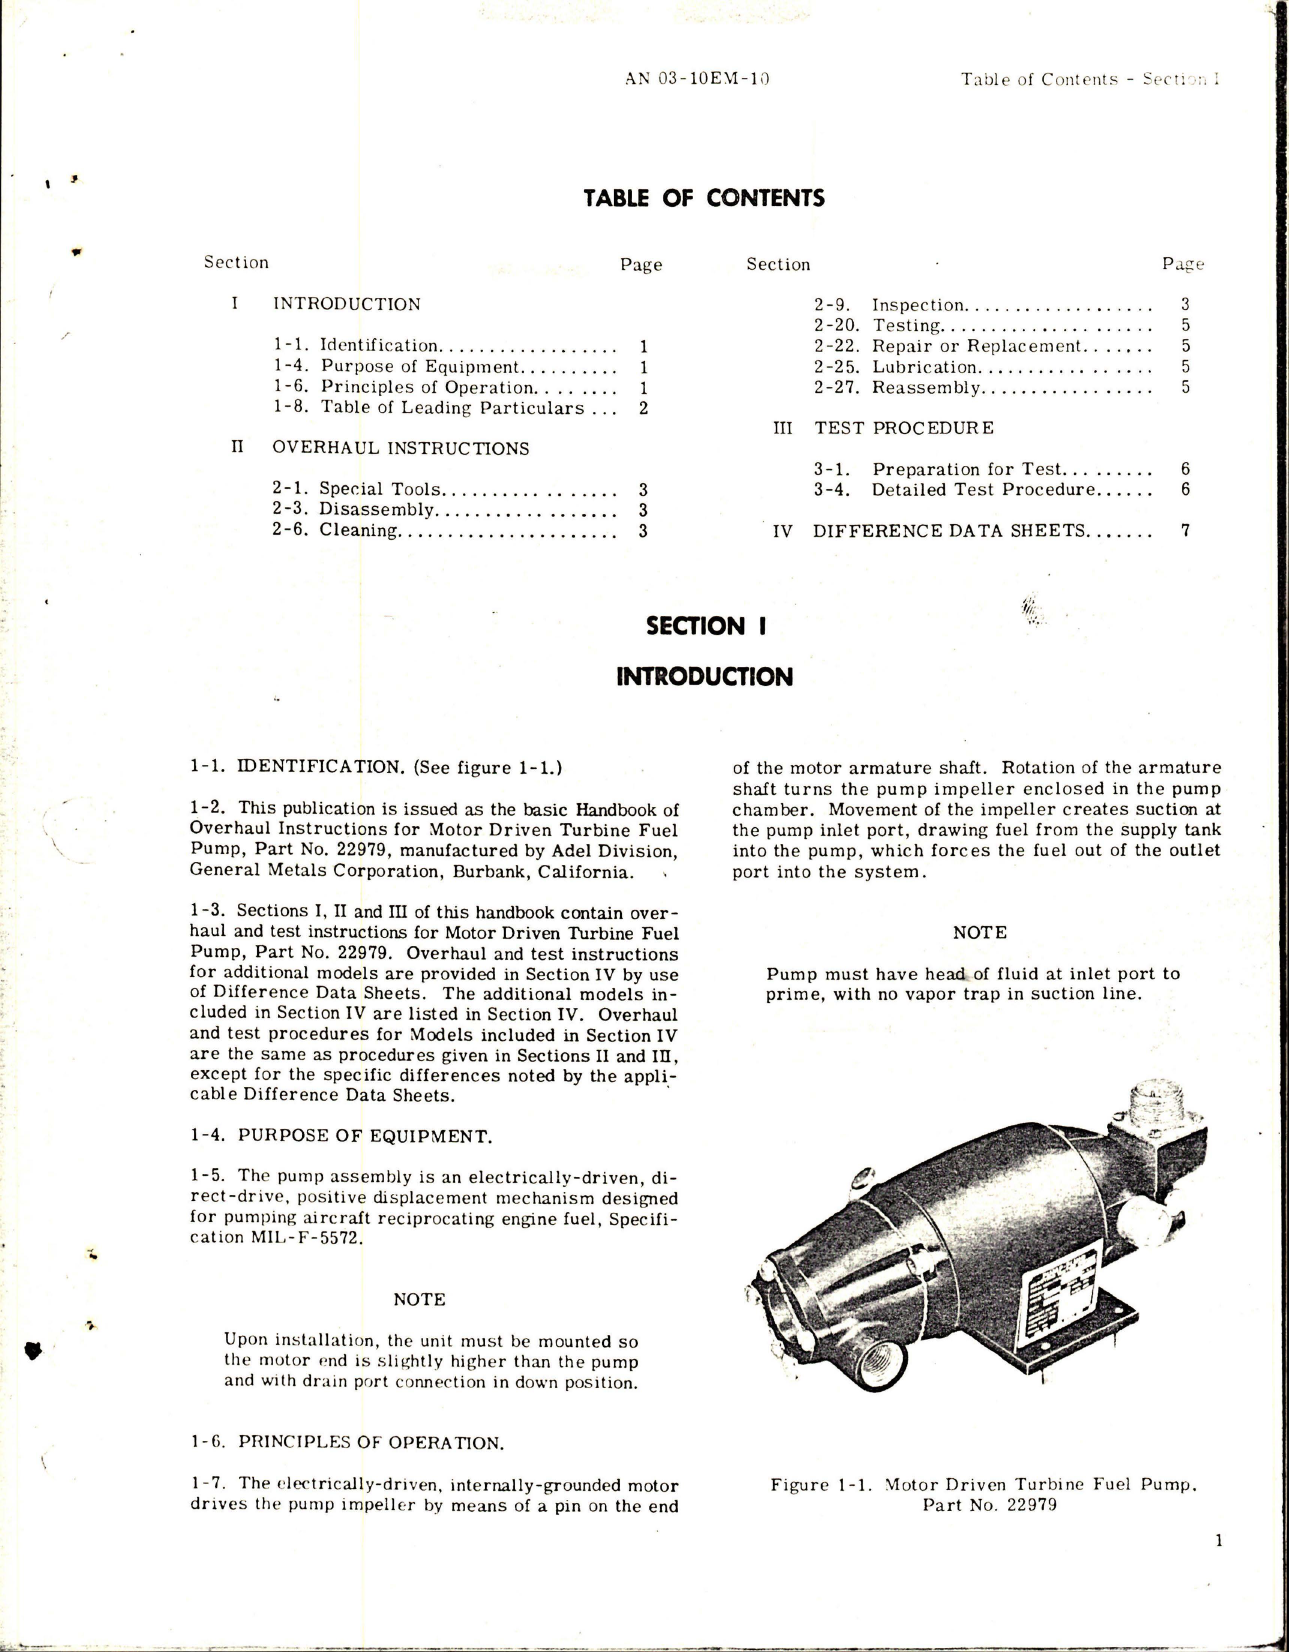 Sample page 5 from AirCorps Library document: Overhaul Instructions for Motor Driven Turbine Fuel Pump - Parts 22979, 22979-2, 28670, and 28670-2 